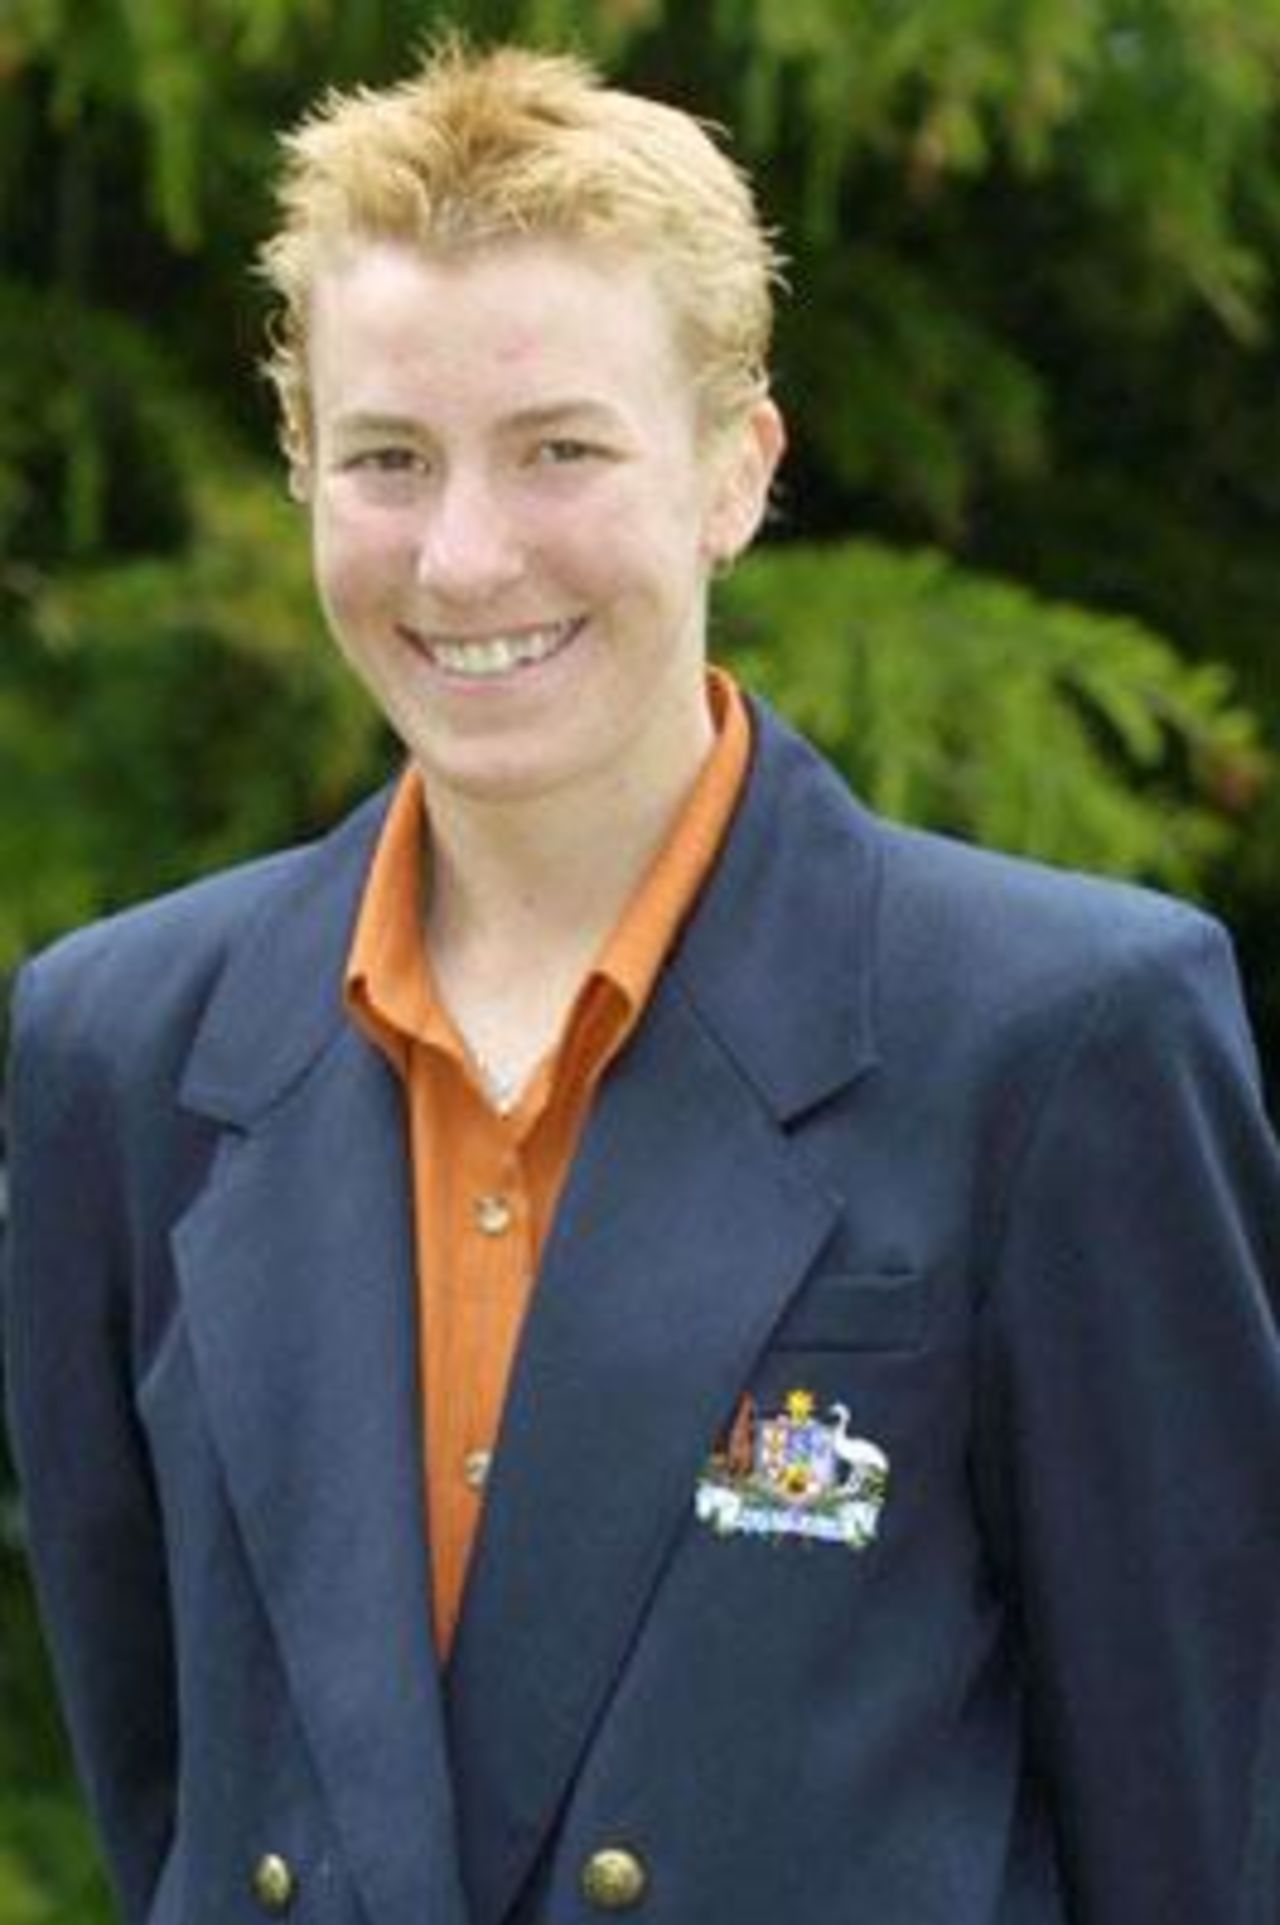 Portrait of Louise Broadfoot - Australia player in the CricInfo Women's World Cup 2000